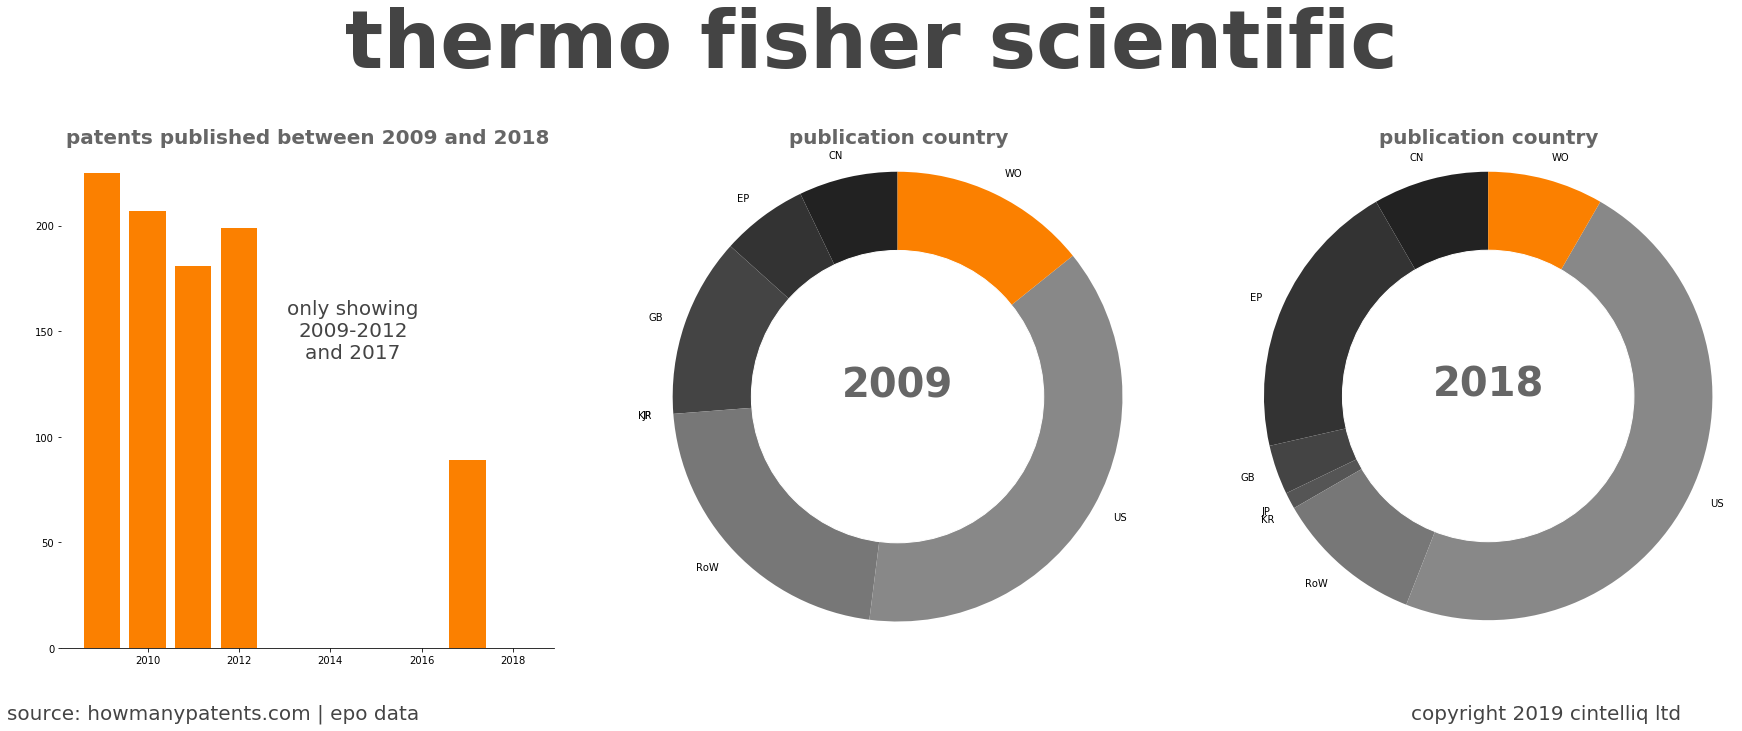 summary of patents for Thermo Fisher Scientific